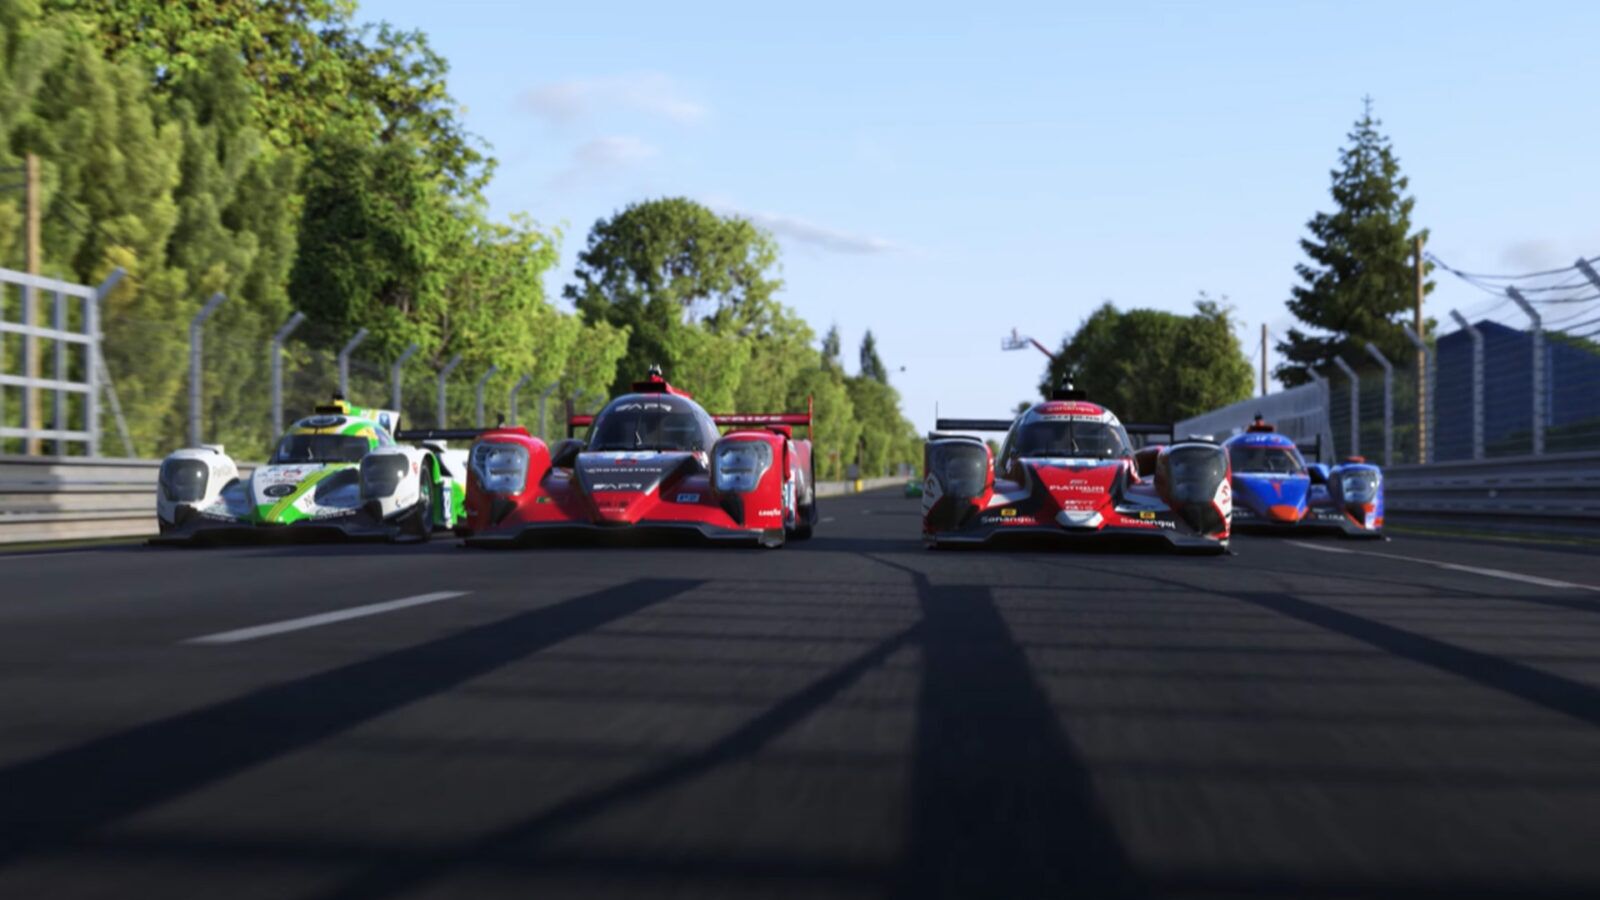 24 Hours of Le Mans Virtual Continues to Attract Champions